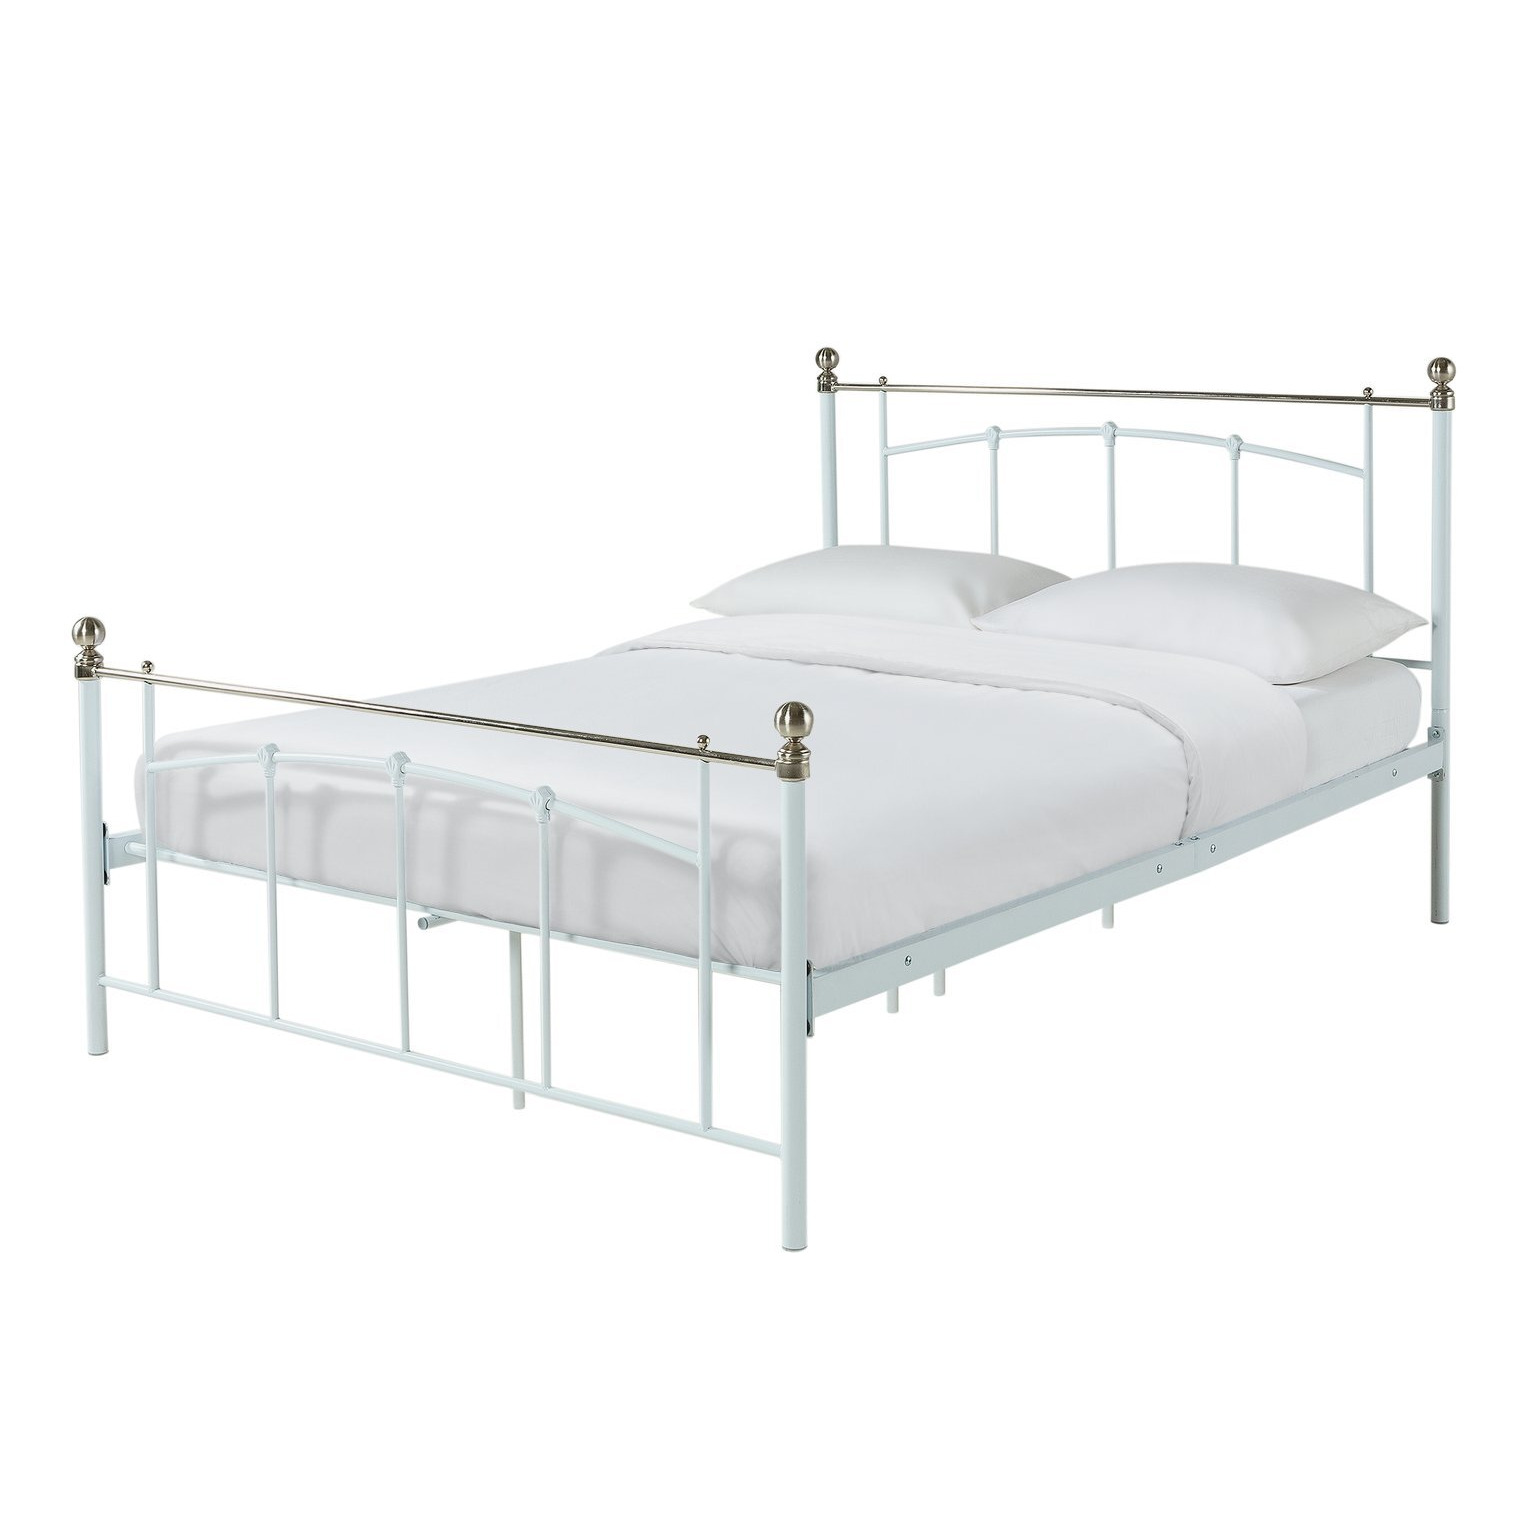 Argos Home Yani Small Double Metal Bed Frame - White - image 1